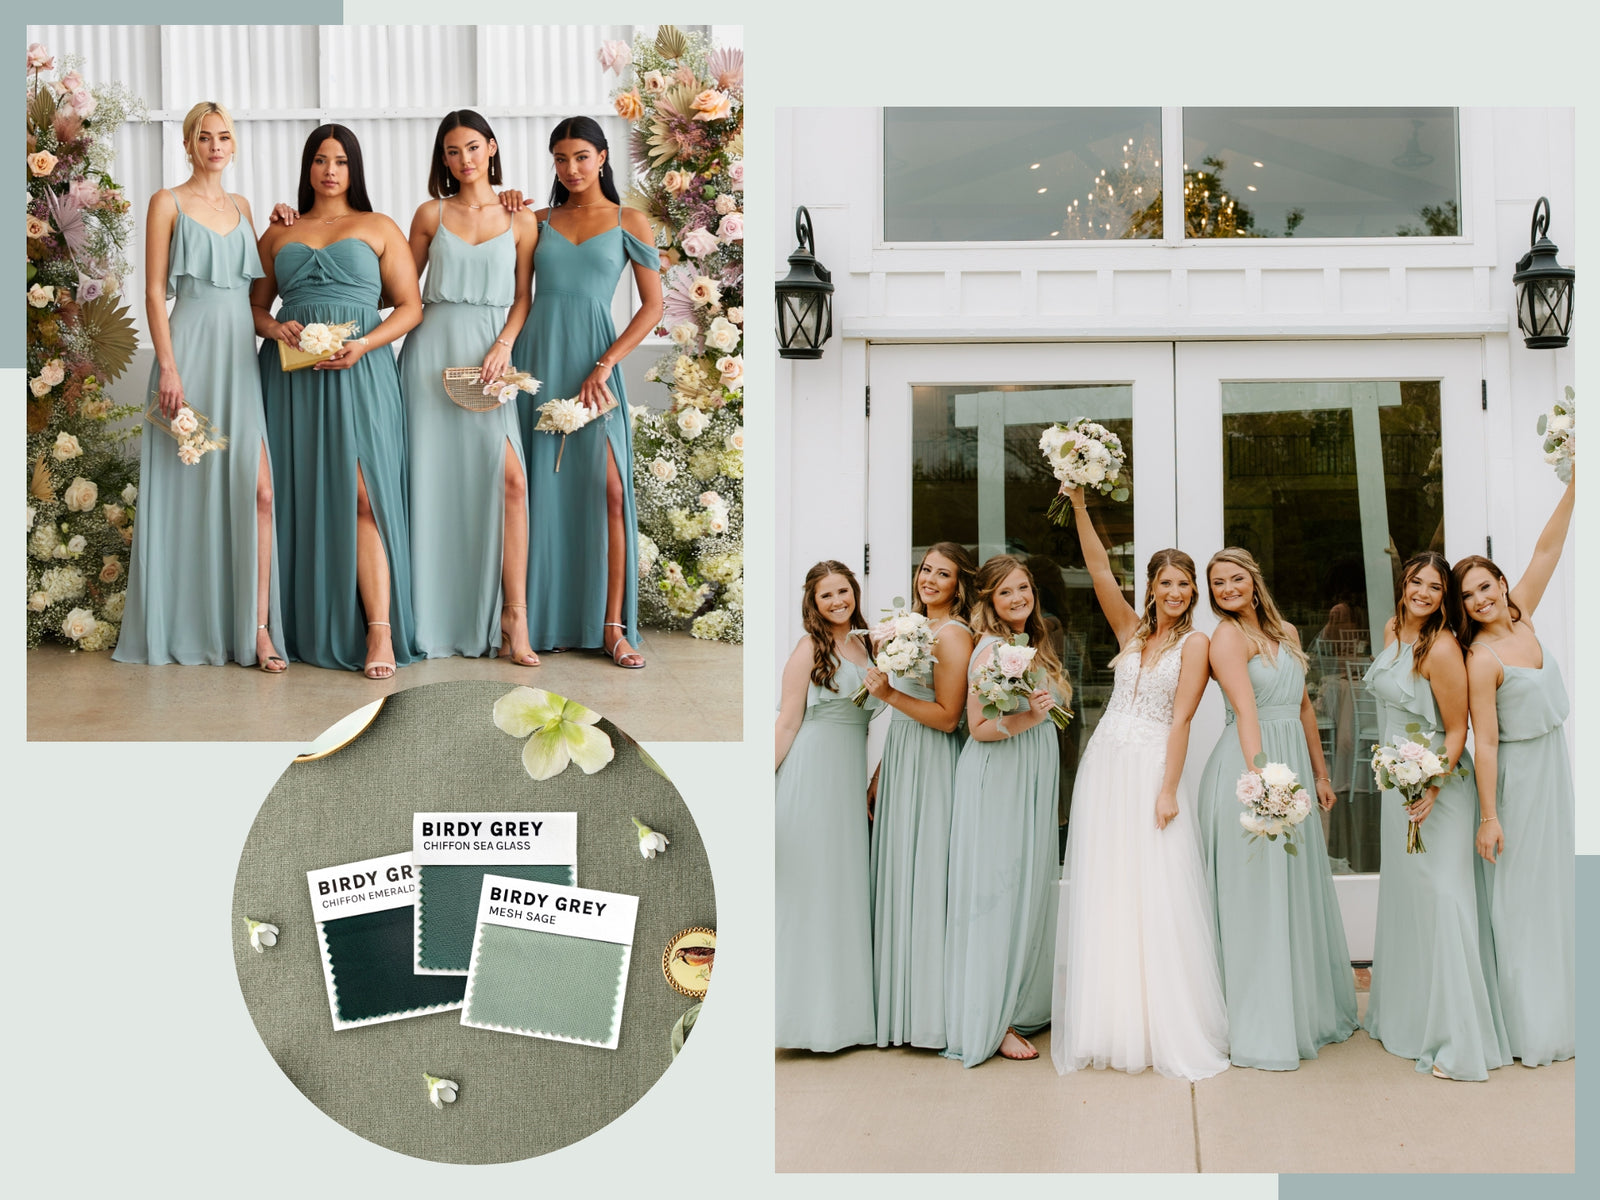 Get 3 Free Bridesmaid Dress Color Swatches